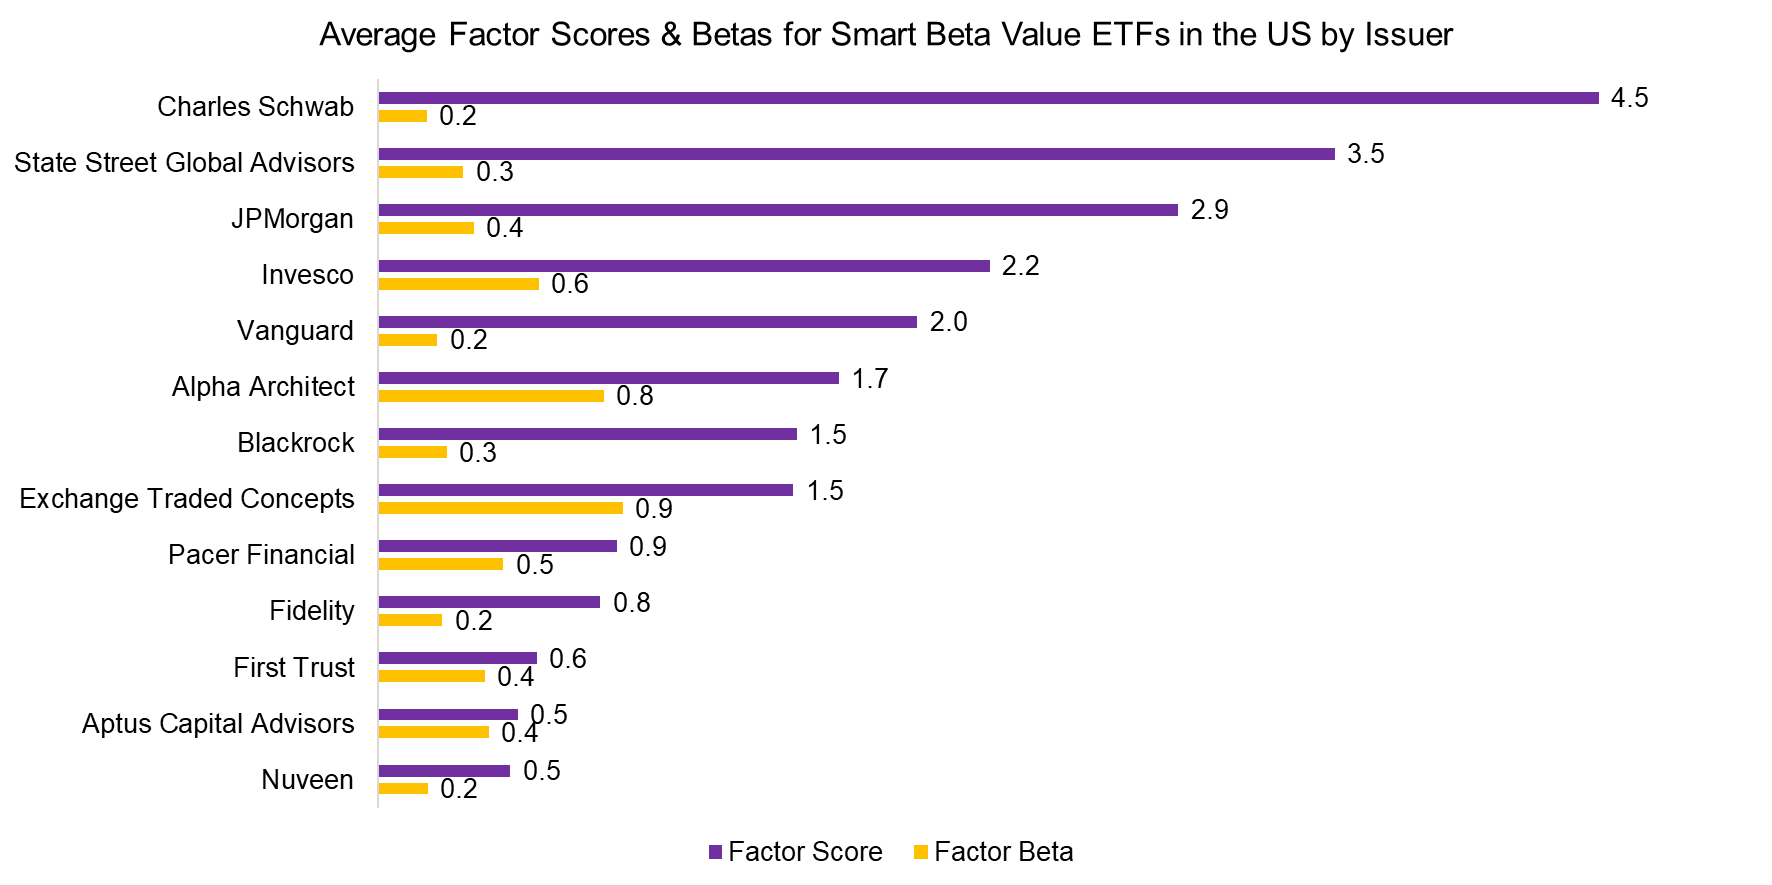 Average Factor Scores & Betas for Smart Beta Value ETFs in the US by Issuer